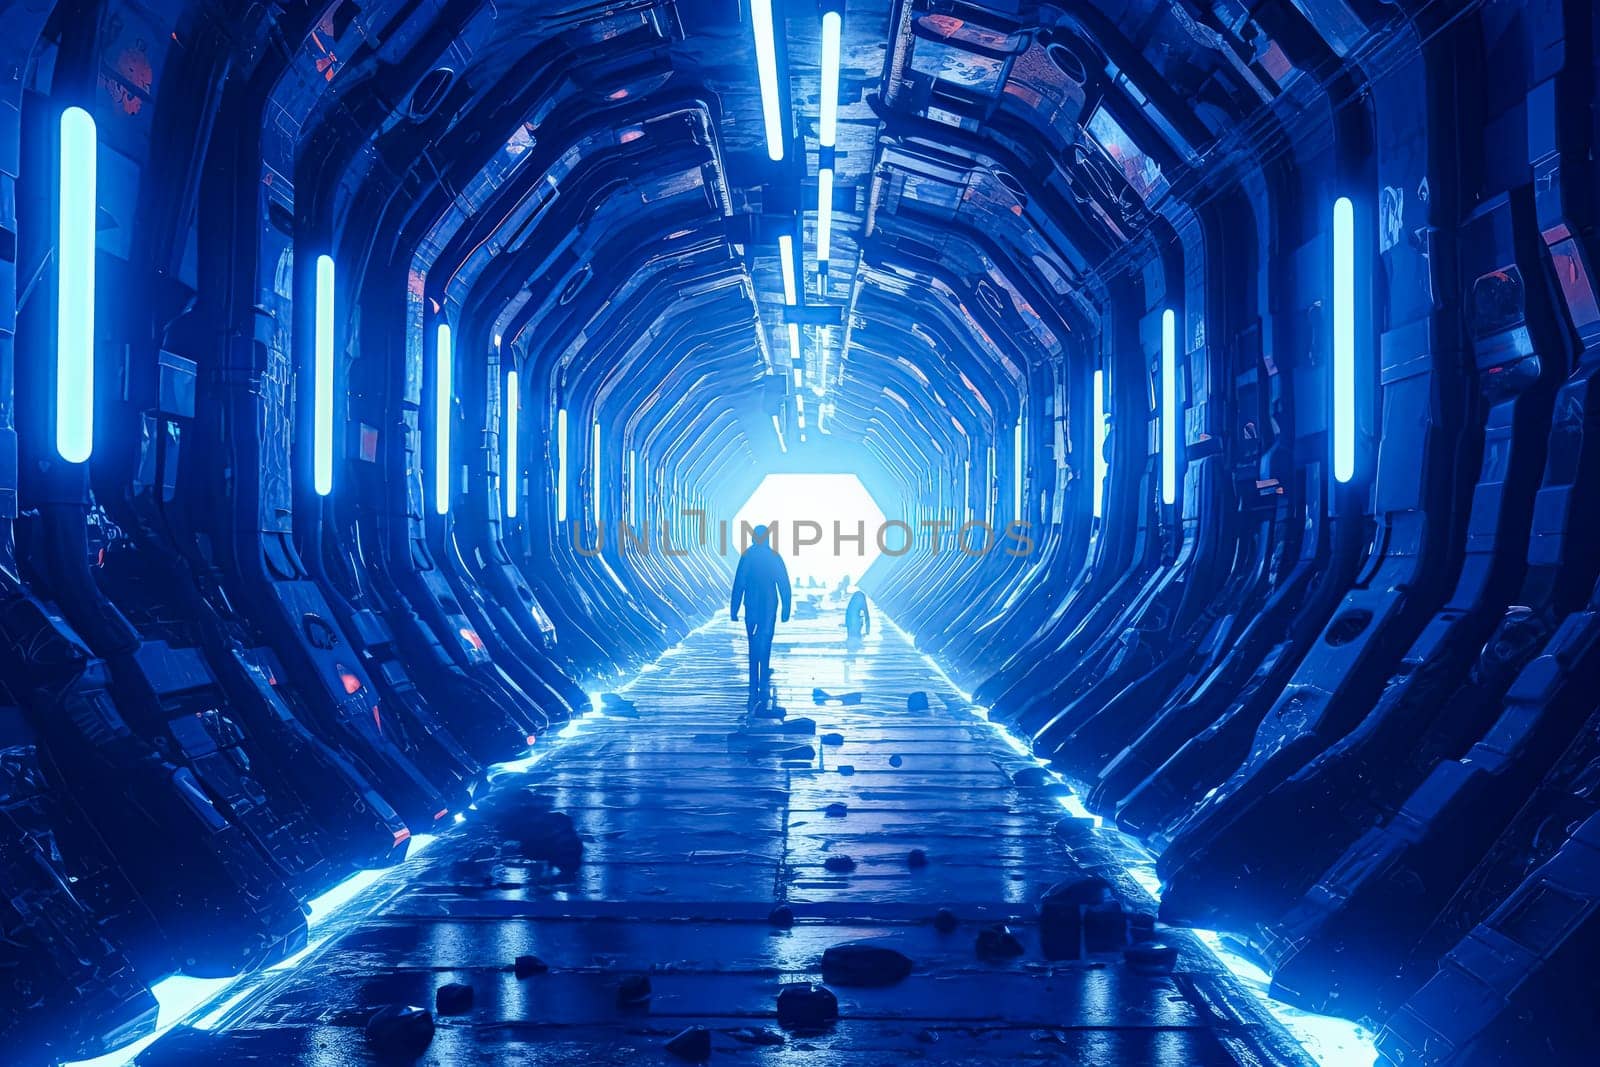 A man is walking down a long, narrow tunnel with blue walls. The tunnel is lit up with blue lights, creating a sense of depth and mystery